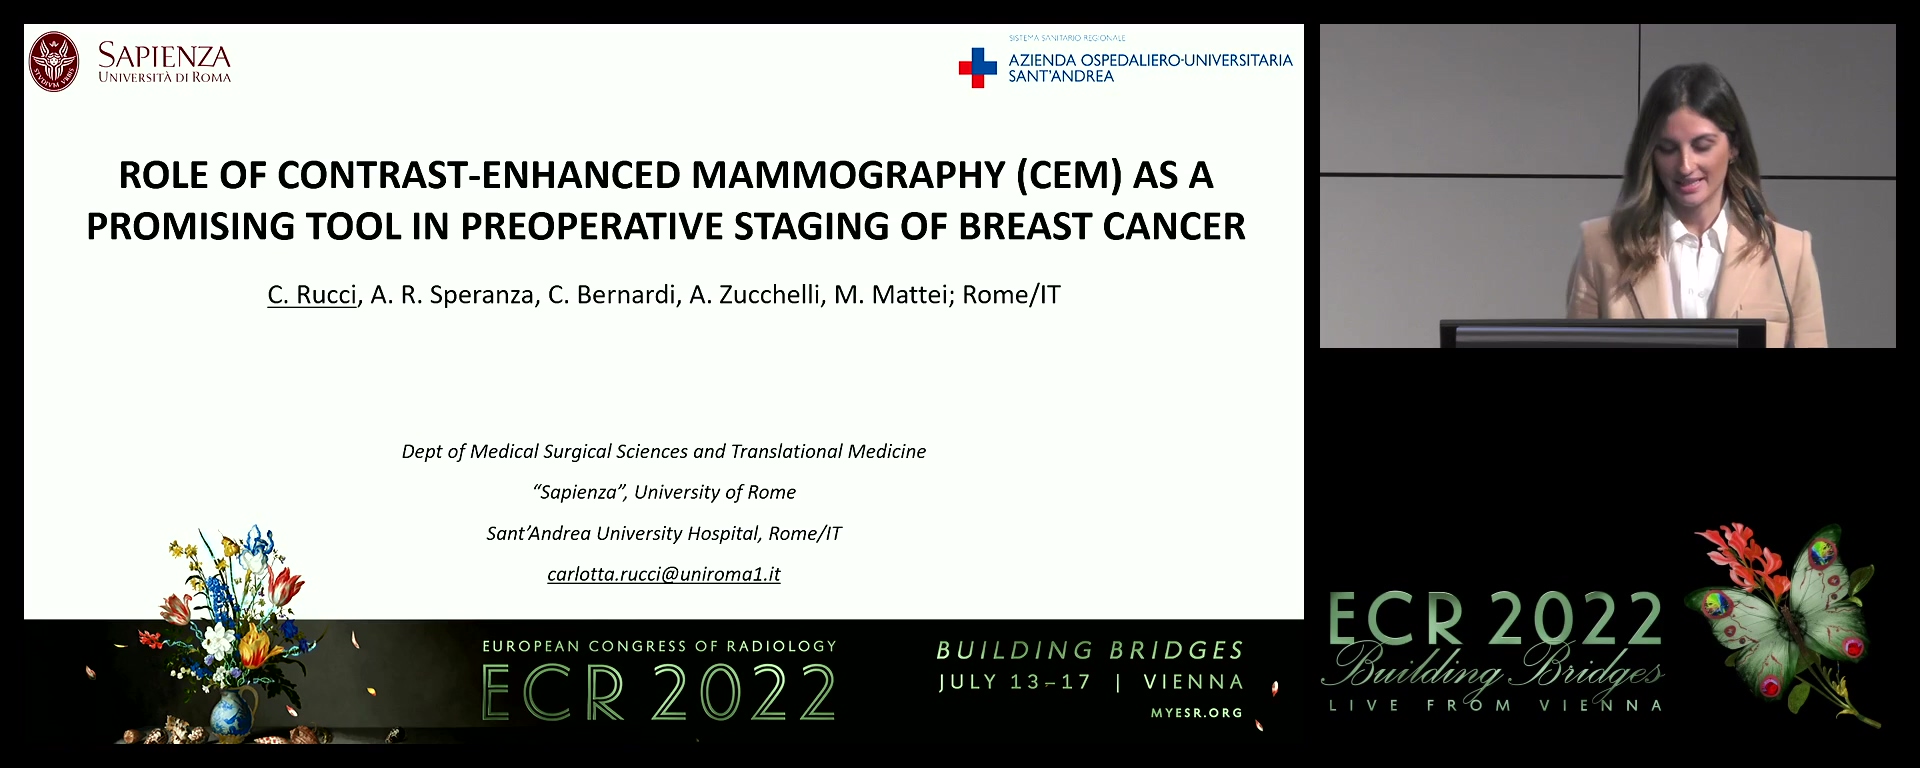 Role of contrast-enhanced mammography (CEM) as a promising tool in preoperative staging of breast cancer